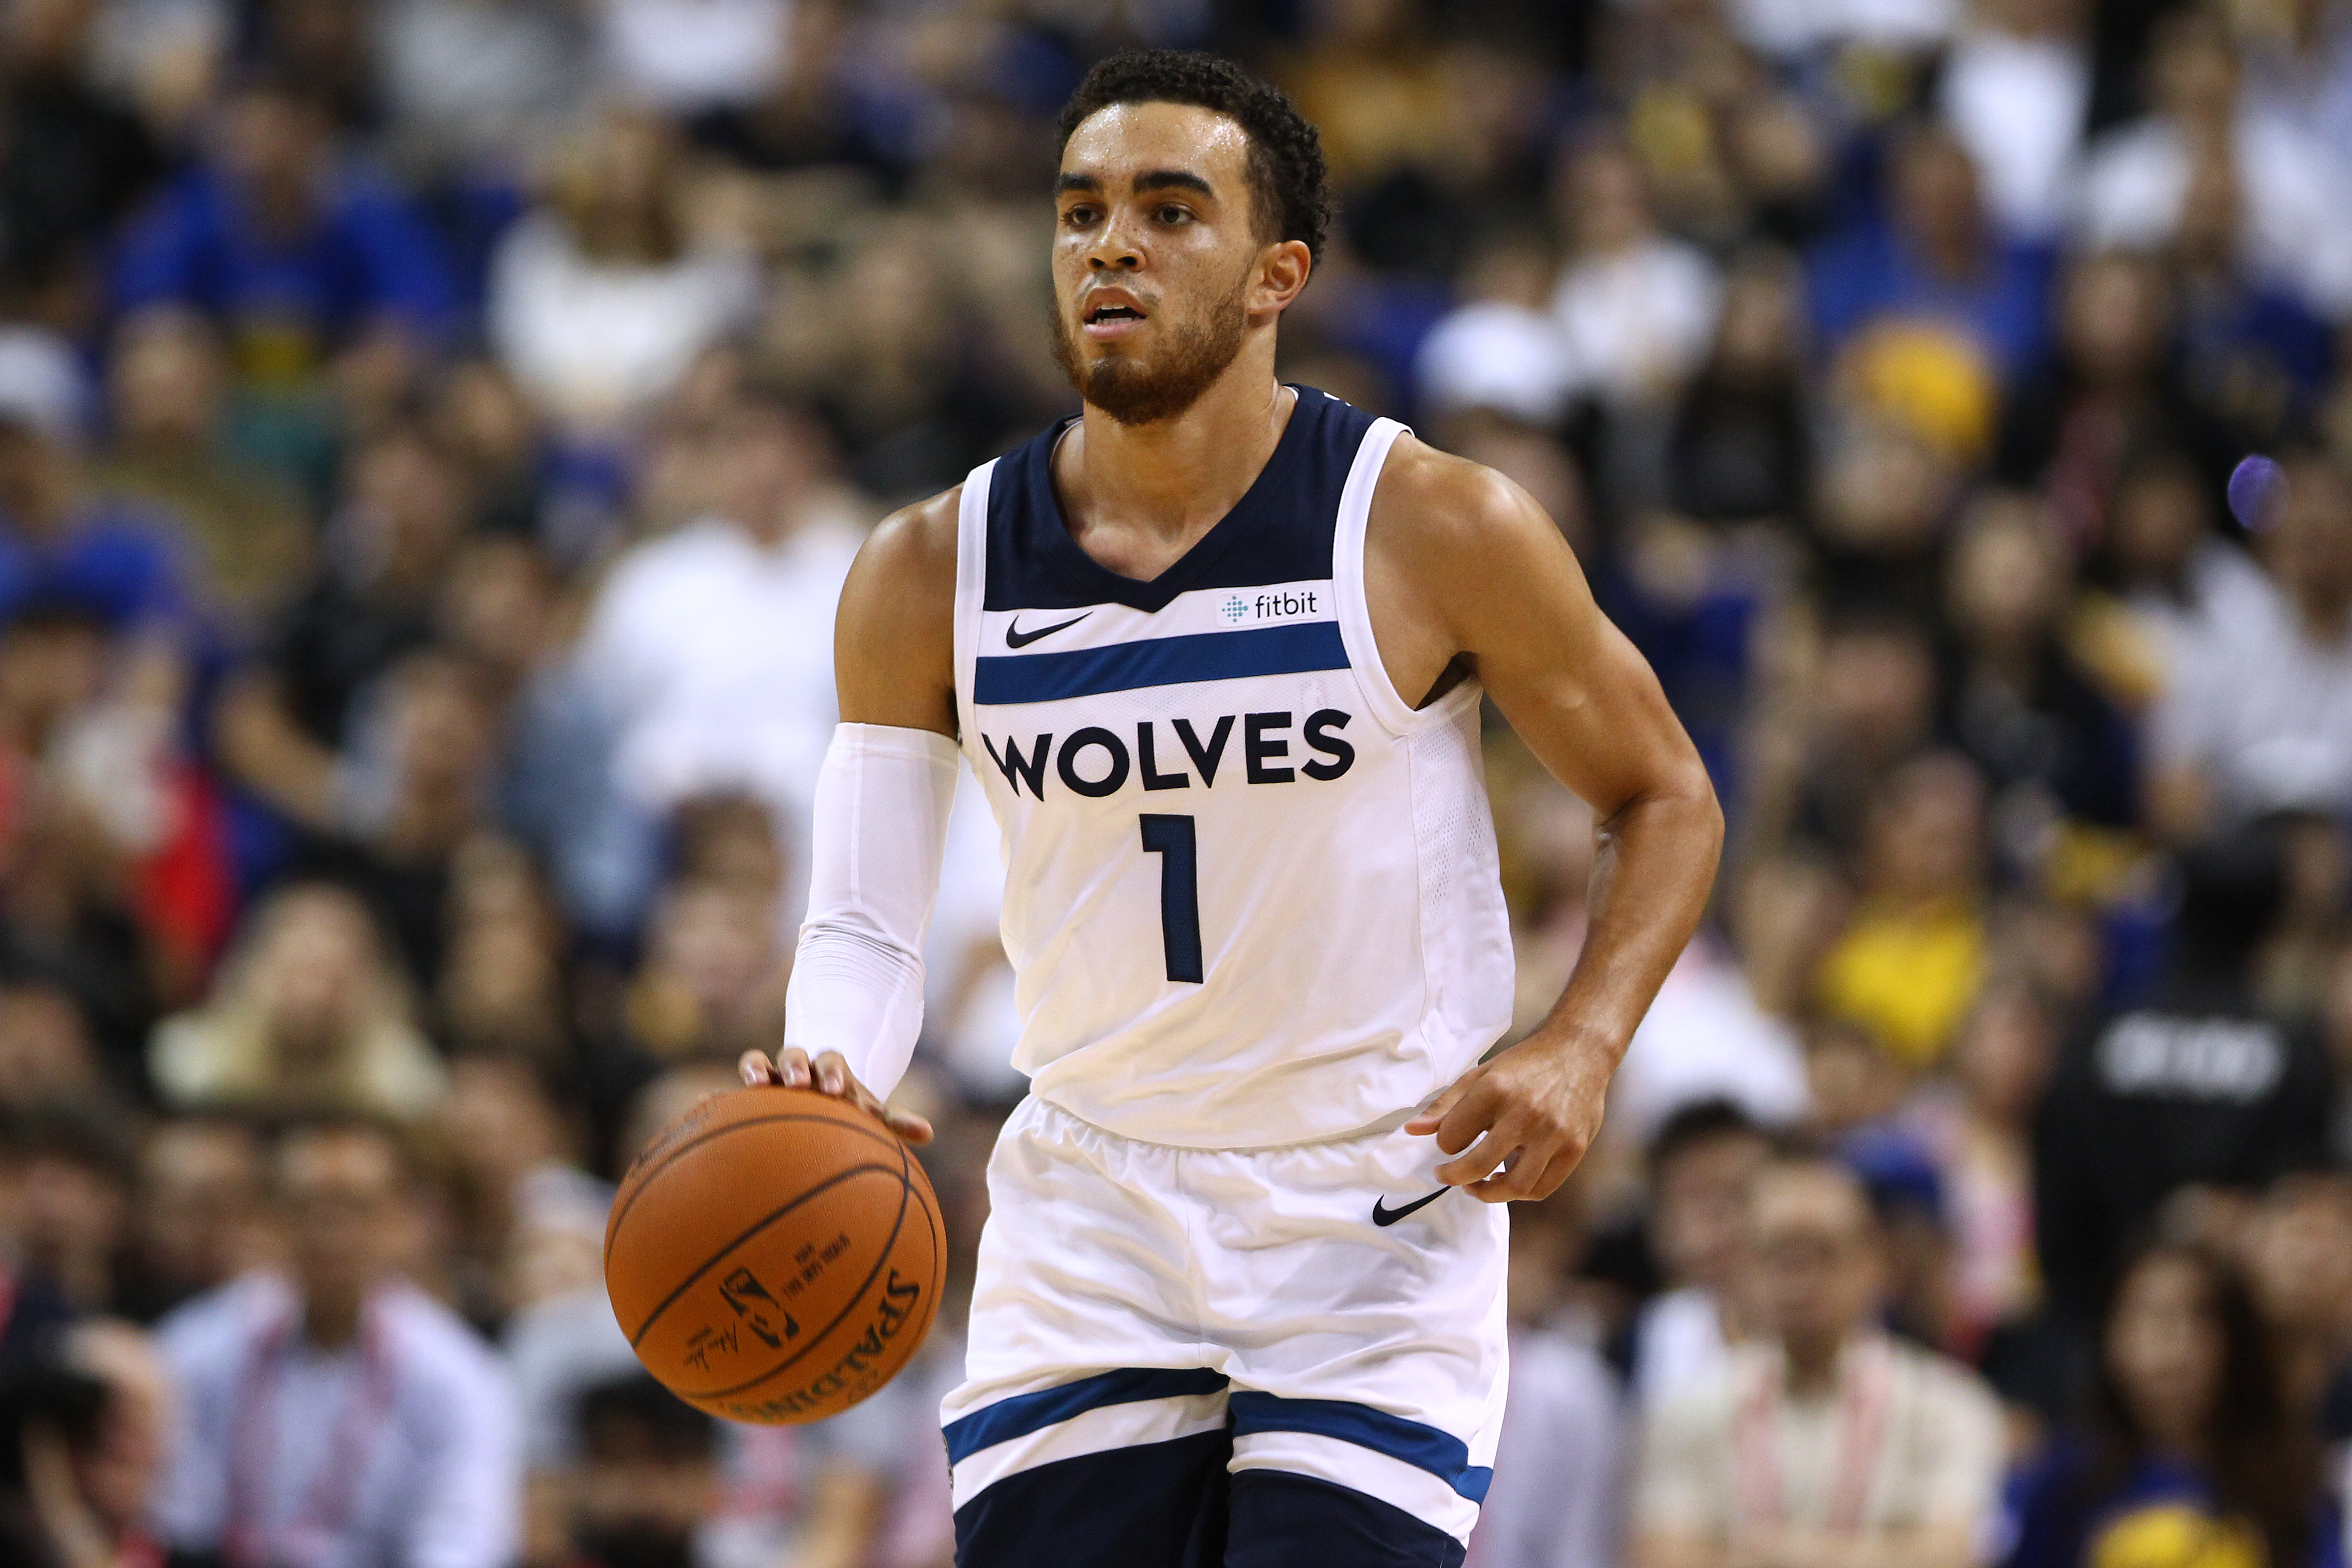 Tyus Jones is ready to become a starting point guard